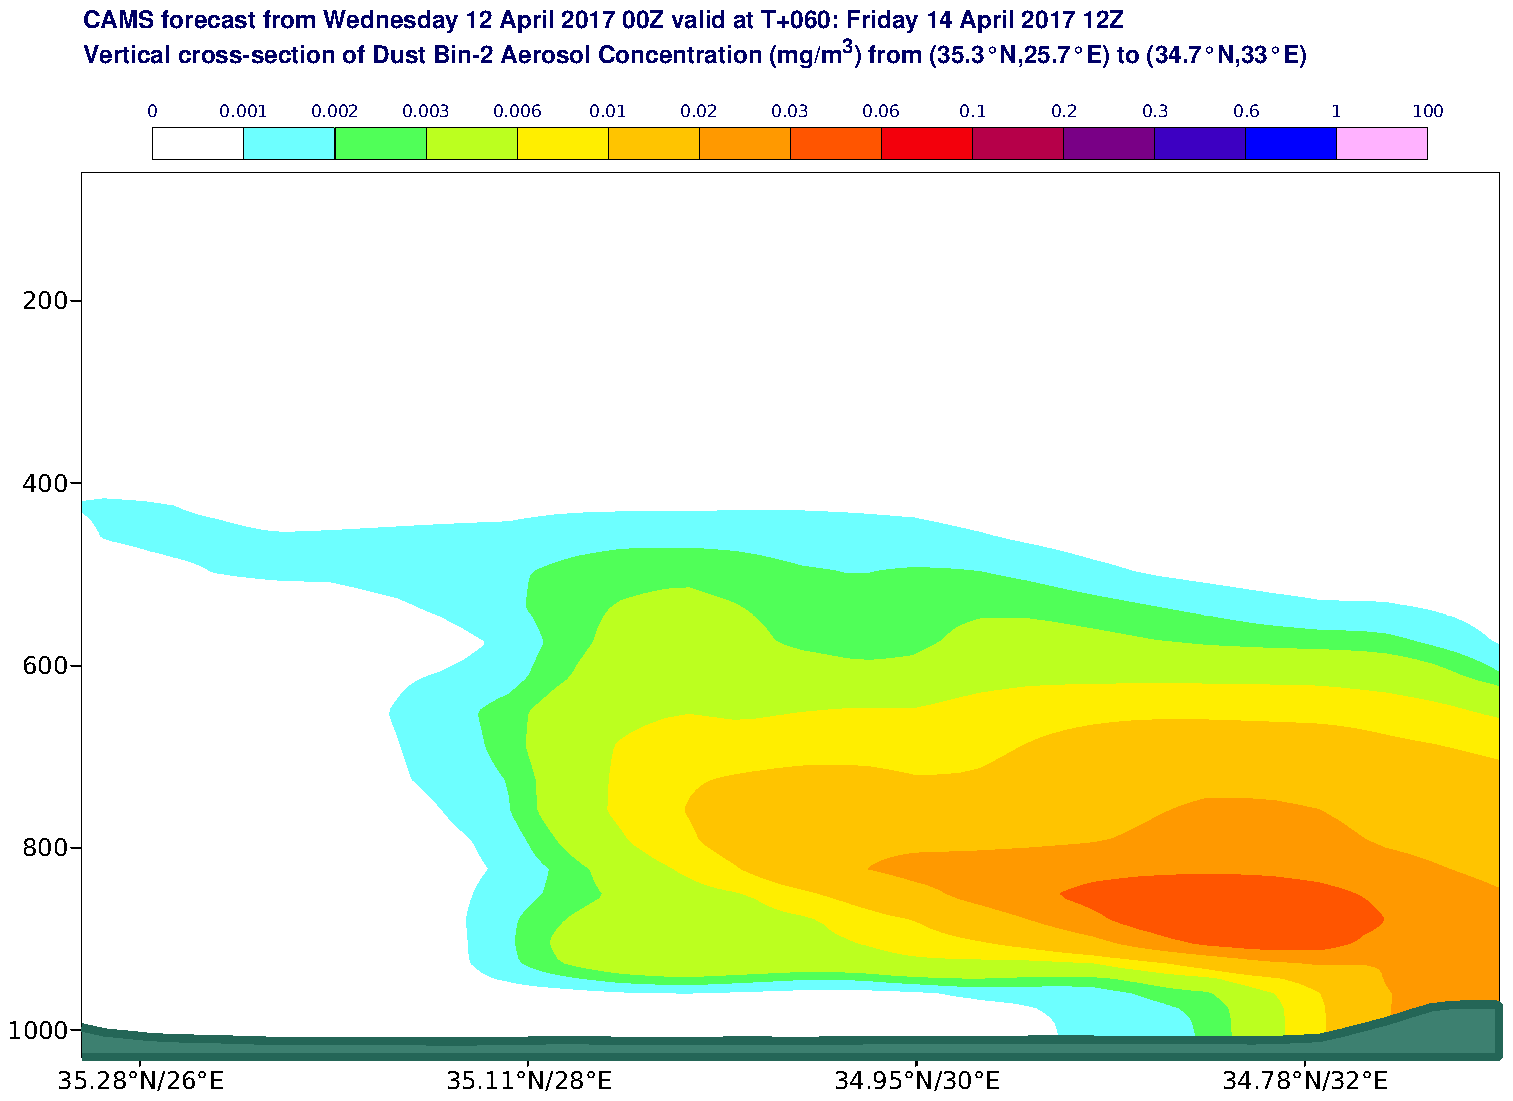 Vertical cross-section of Dust Bin-2 Aerosol Concentration (mg/m3) valid at T60 - 2017-04-14 12:00